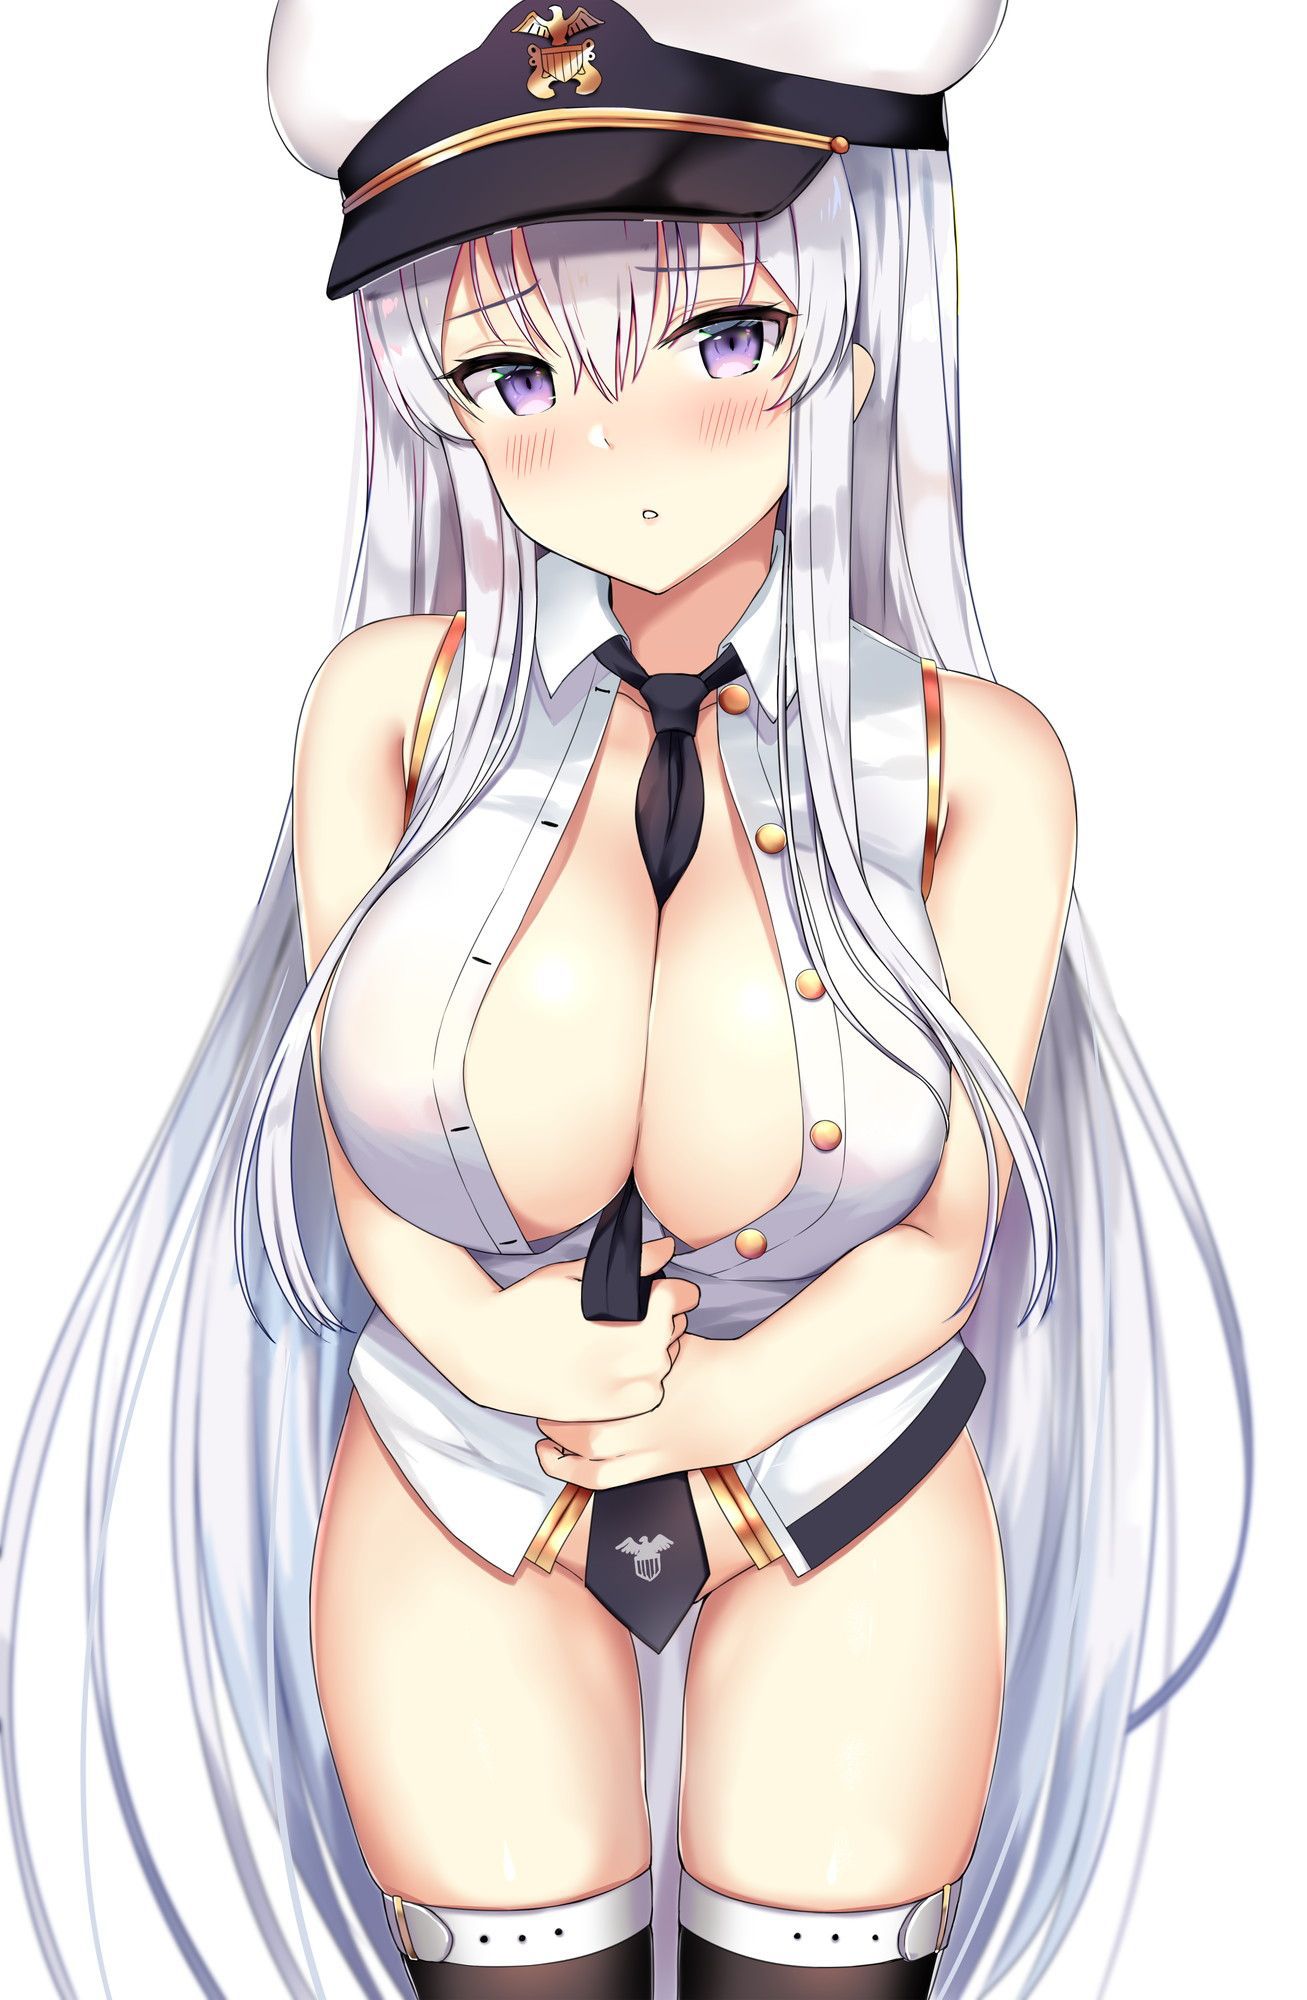 Gather people who want to see the erotic images of Azur Lane! 14